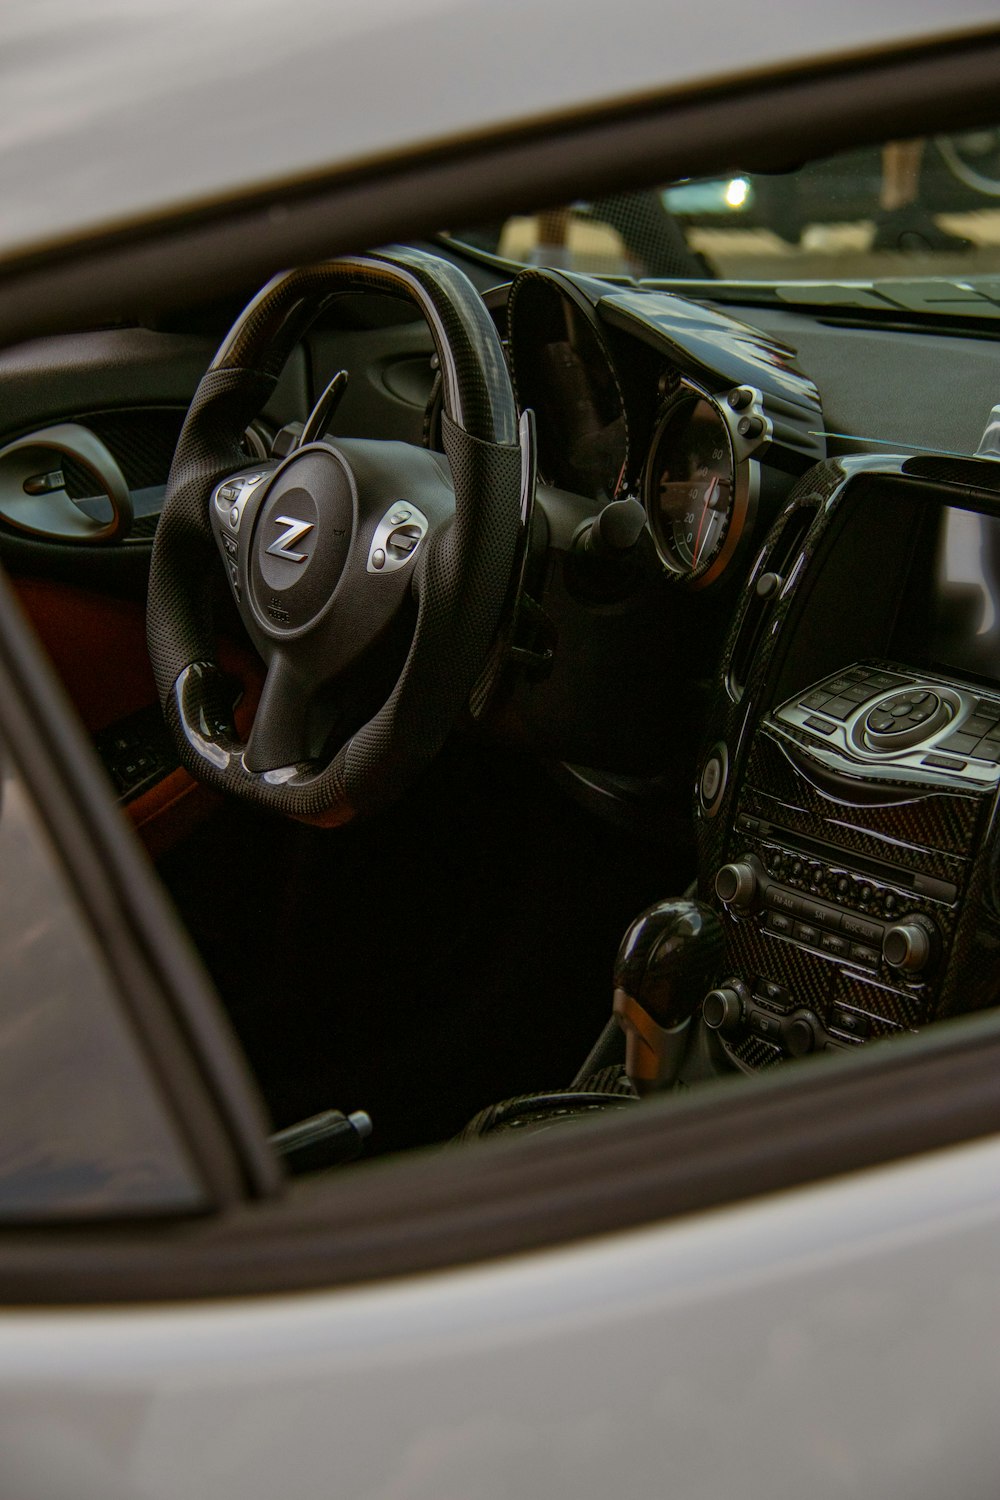 the interior of a car with a steering wheel